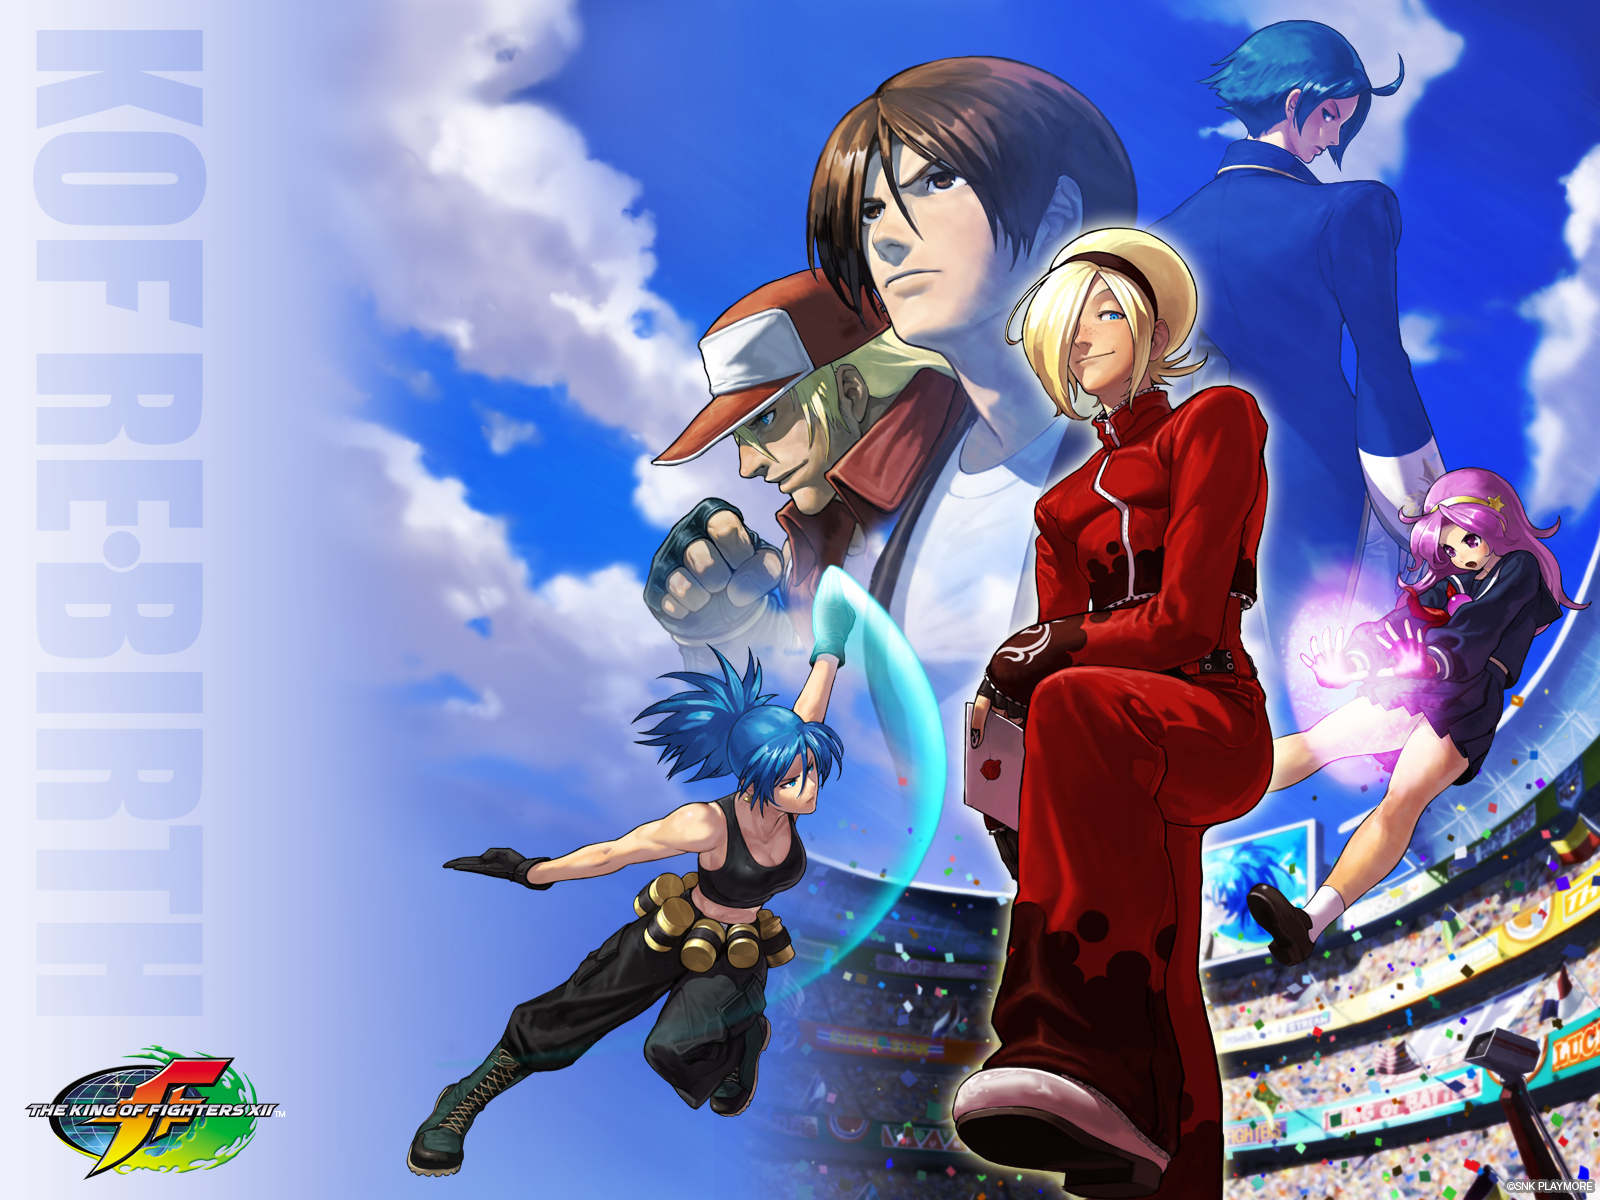 The King Of Fighters XII High Quality Background on Wallpapers Vista